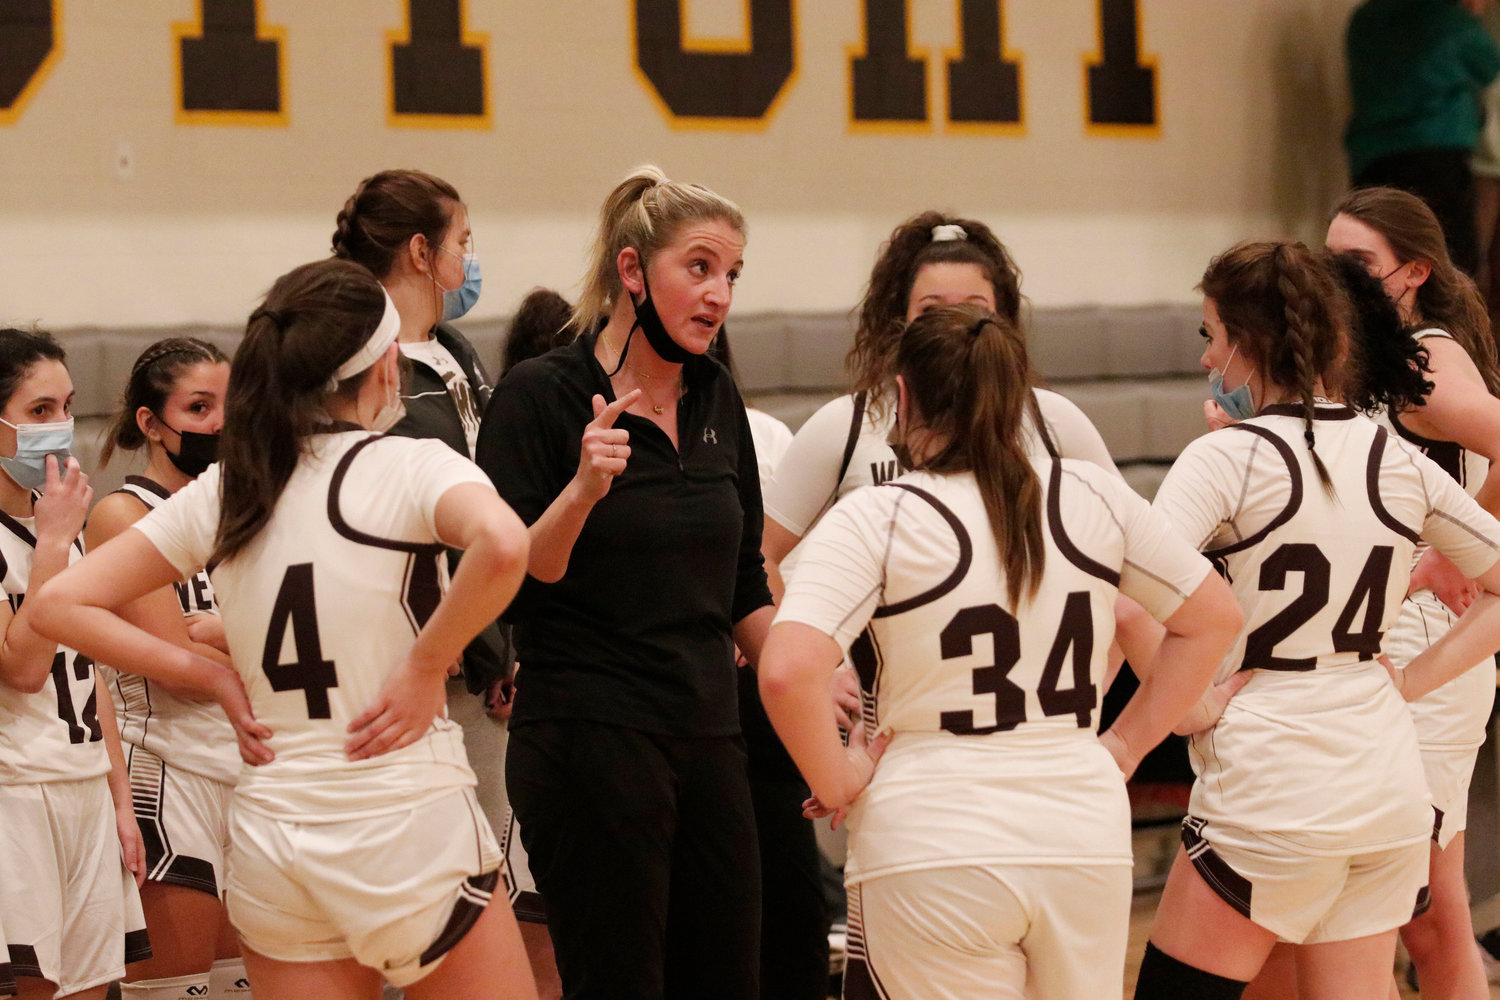 Westport head coach Jen Gargiulo speaks to the team during a time out during their home game against Bourne this season. She'll miss her seniors and look forward to see who steps up and into different roles next season.